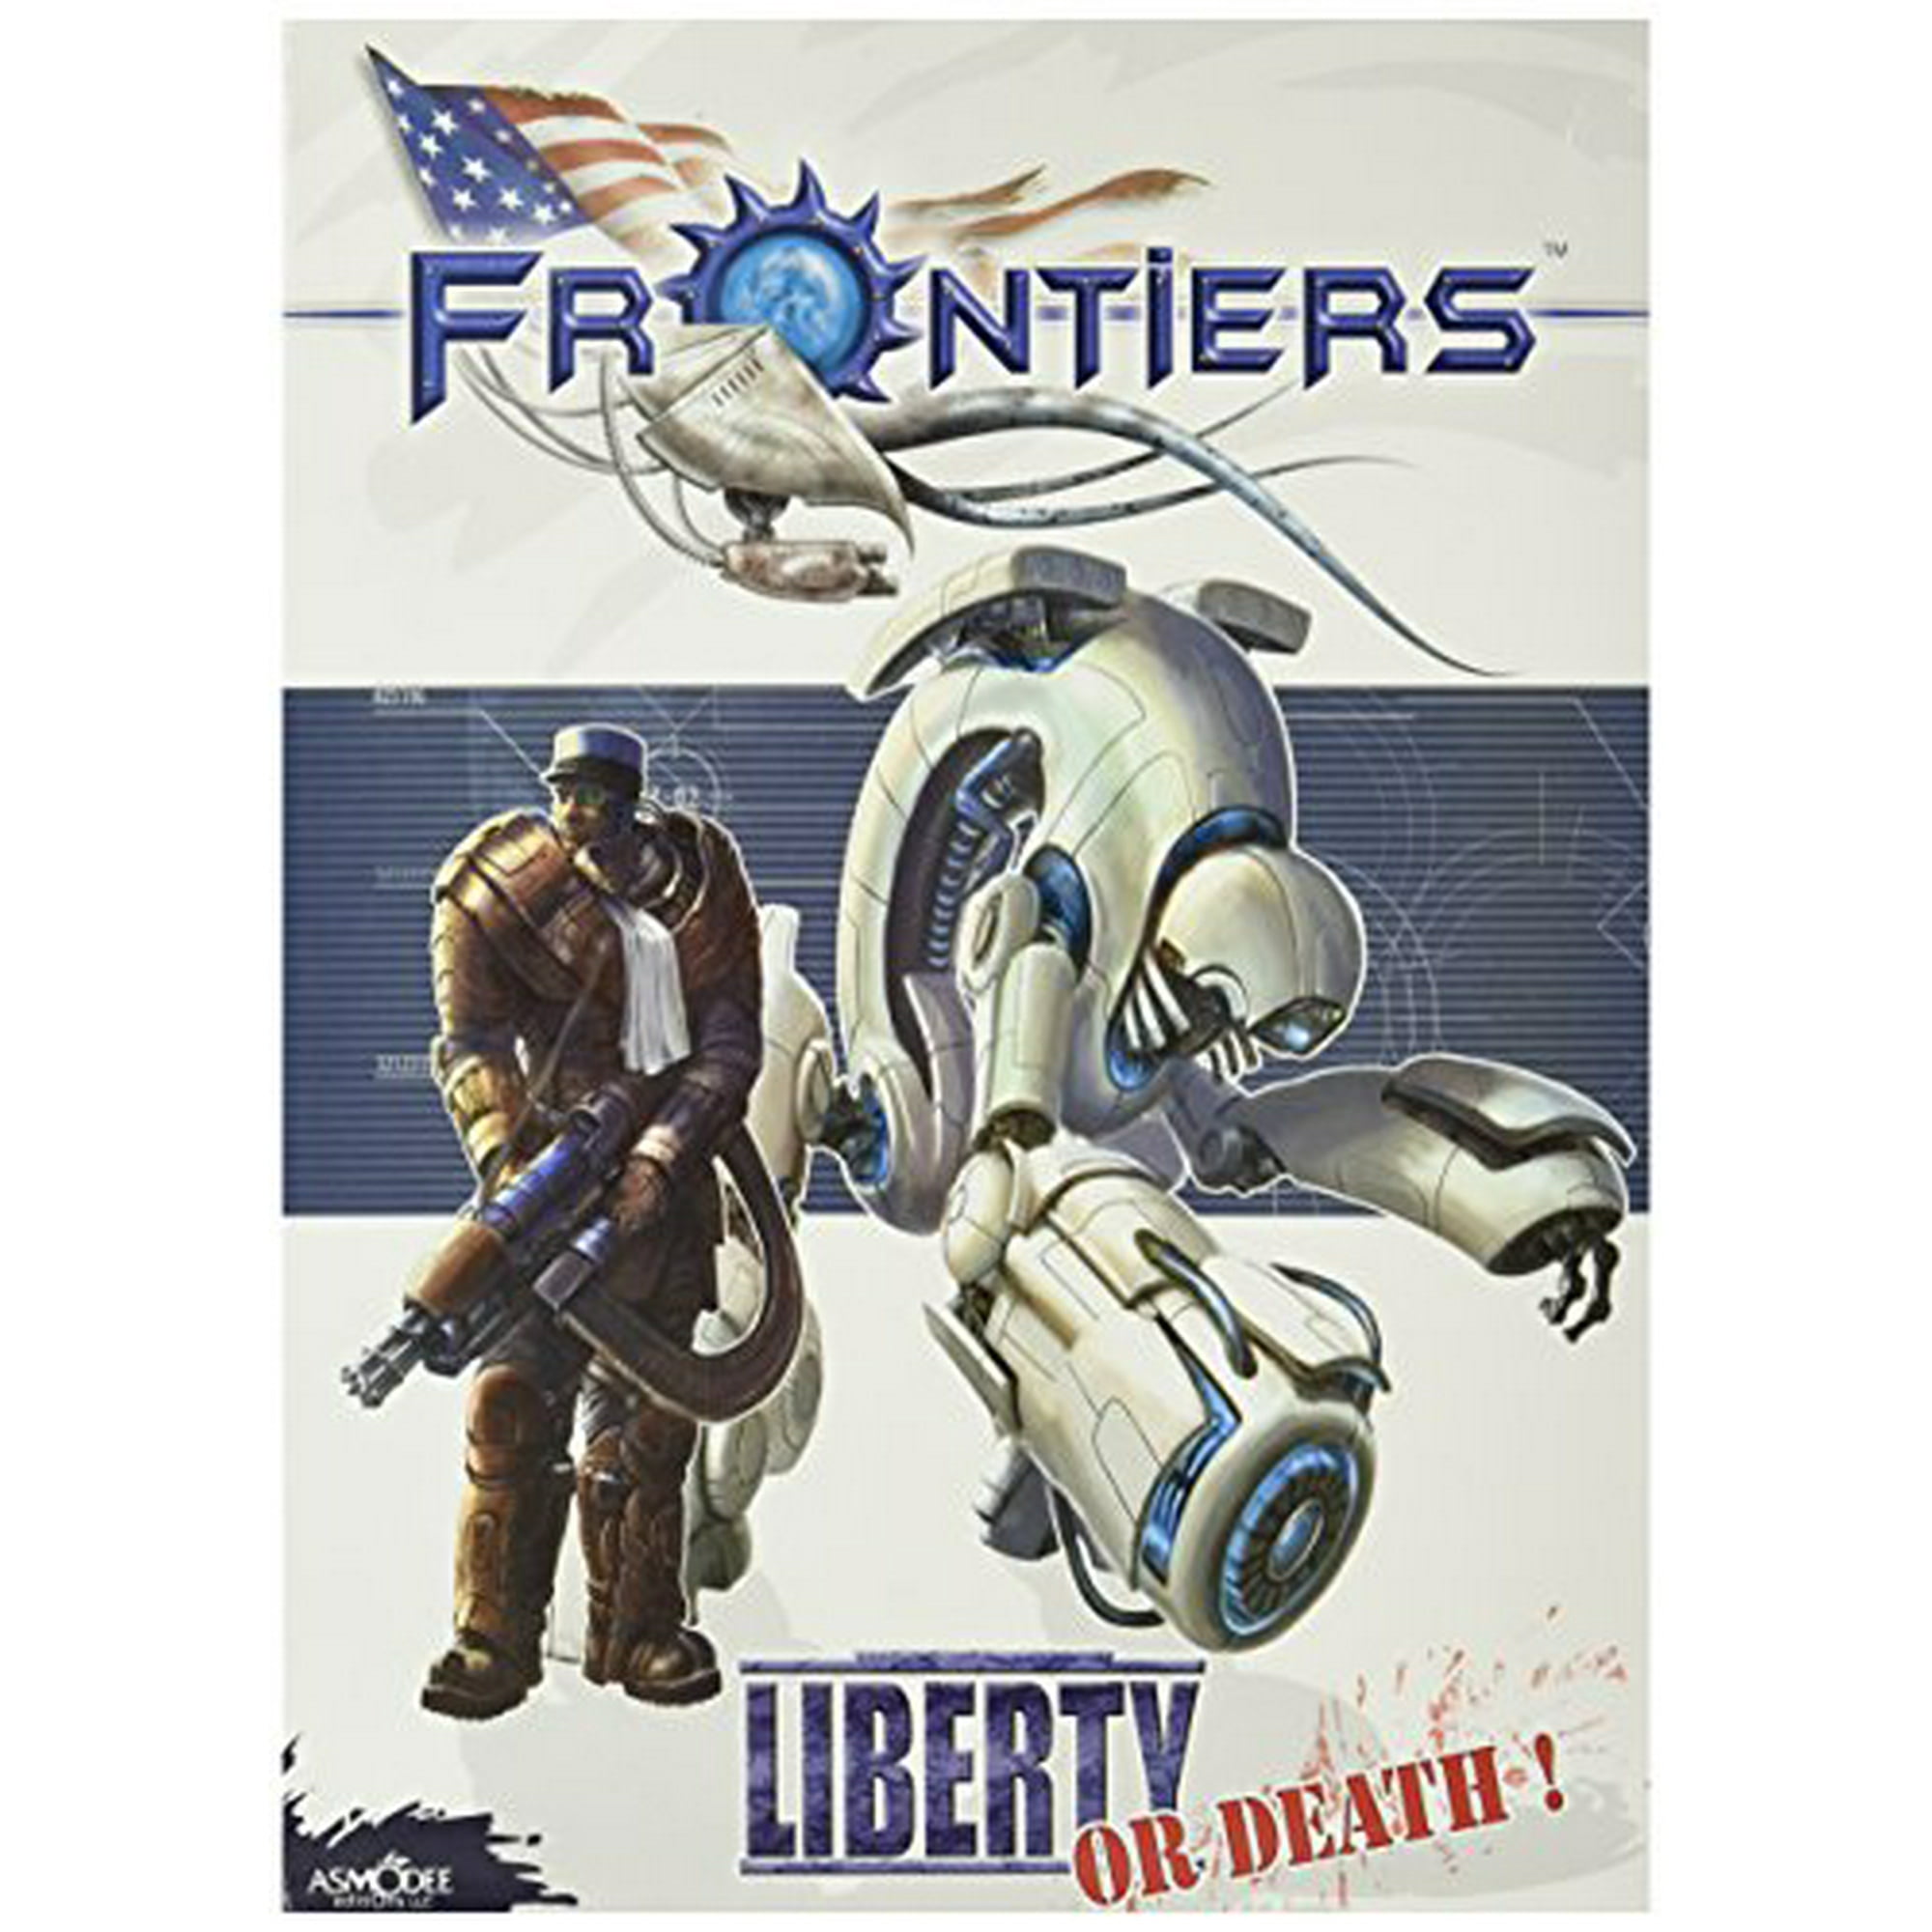 Frontiers Liberty Or Death